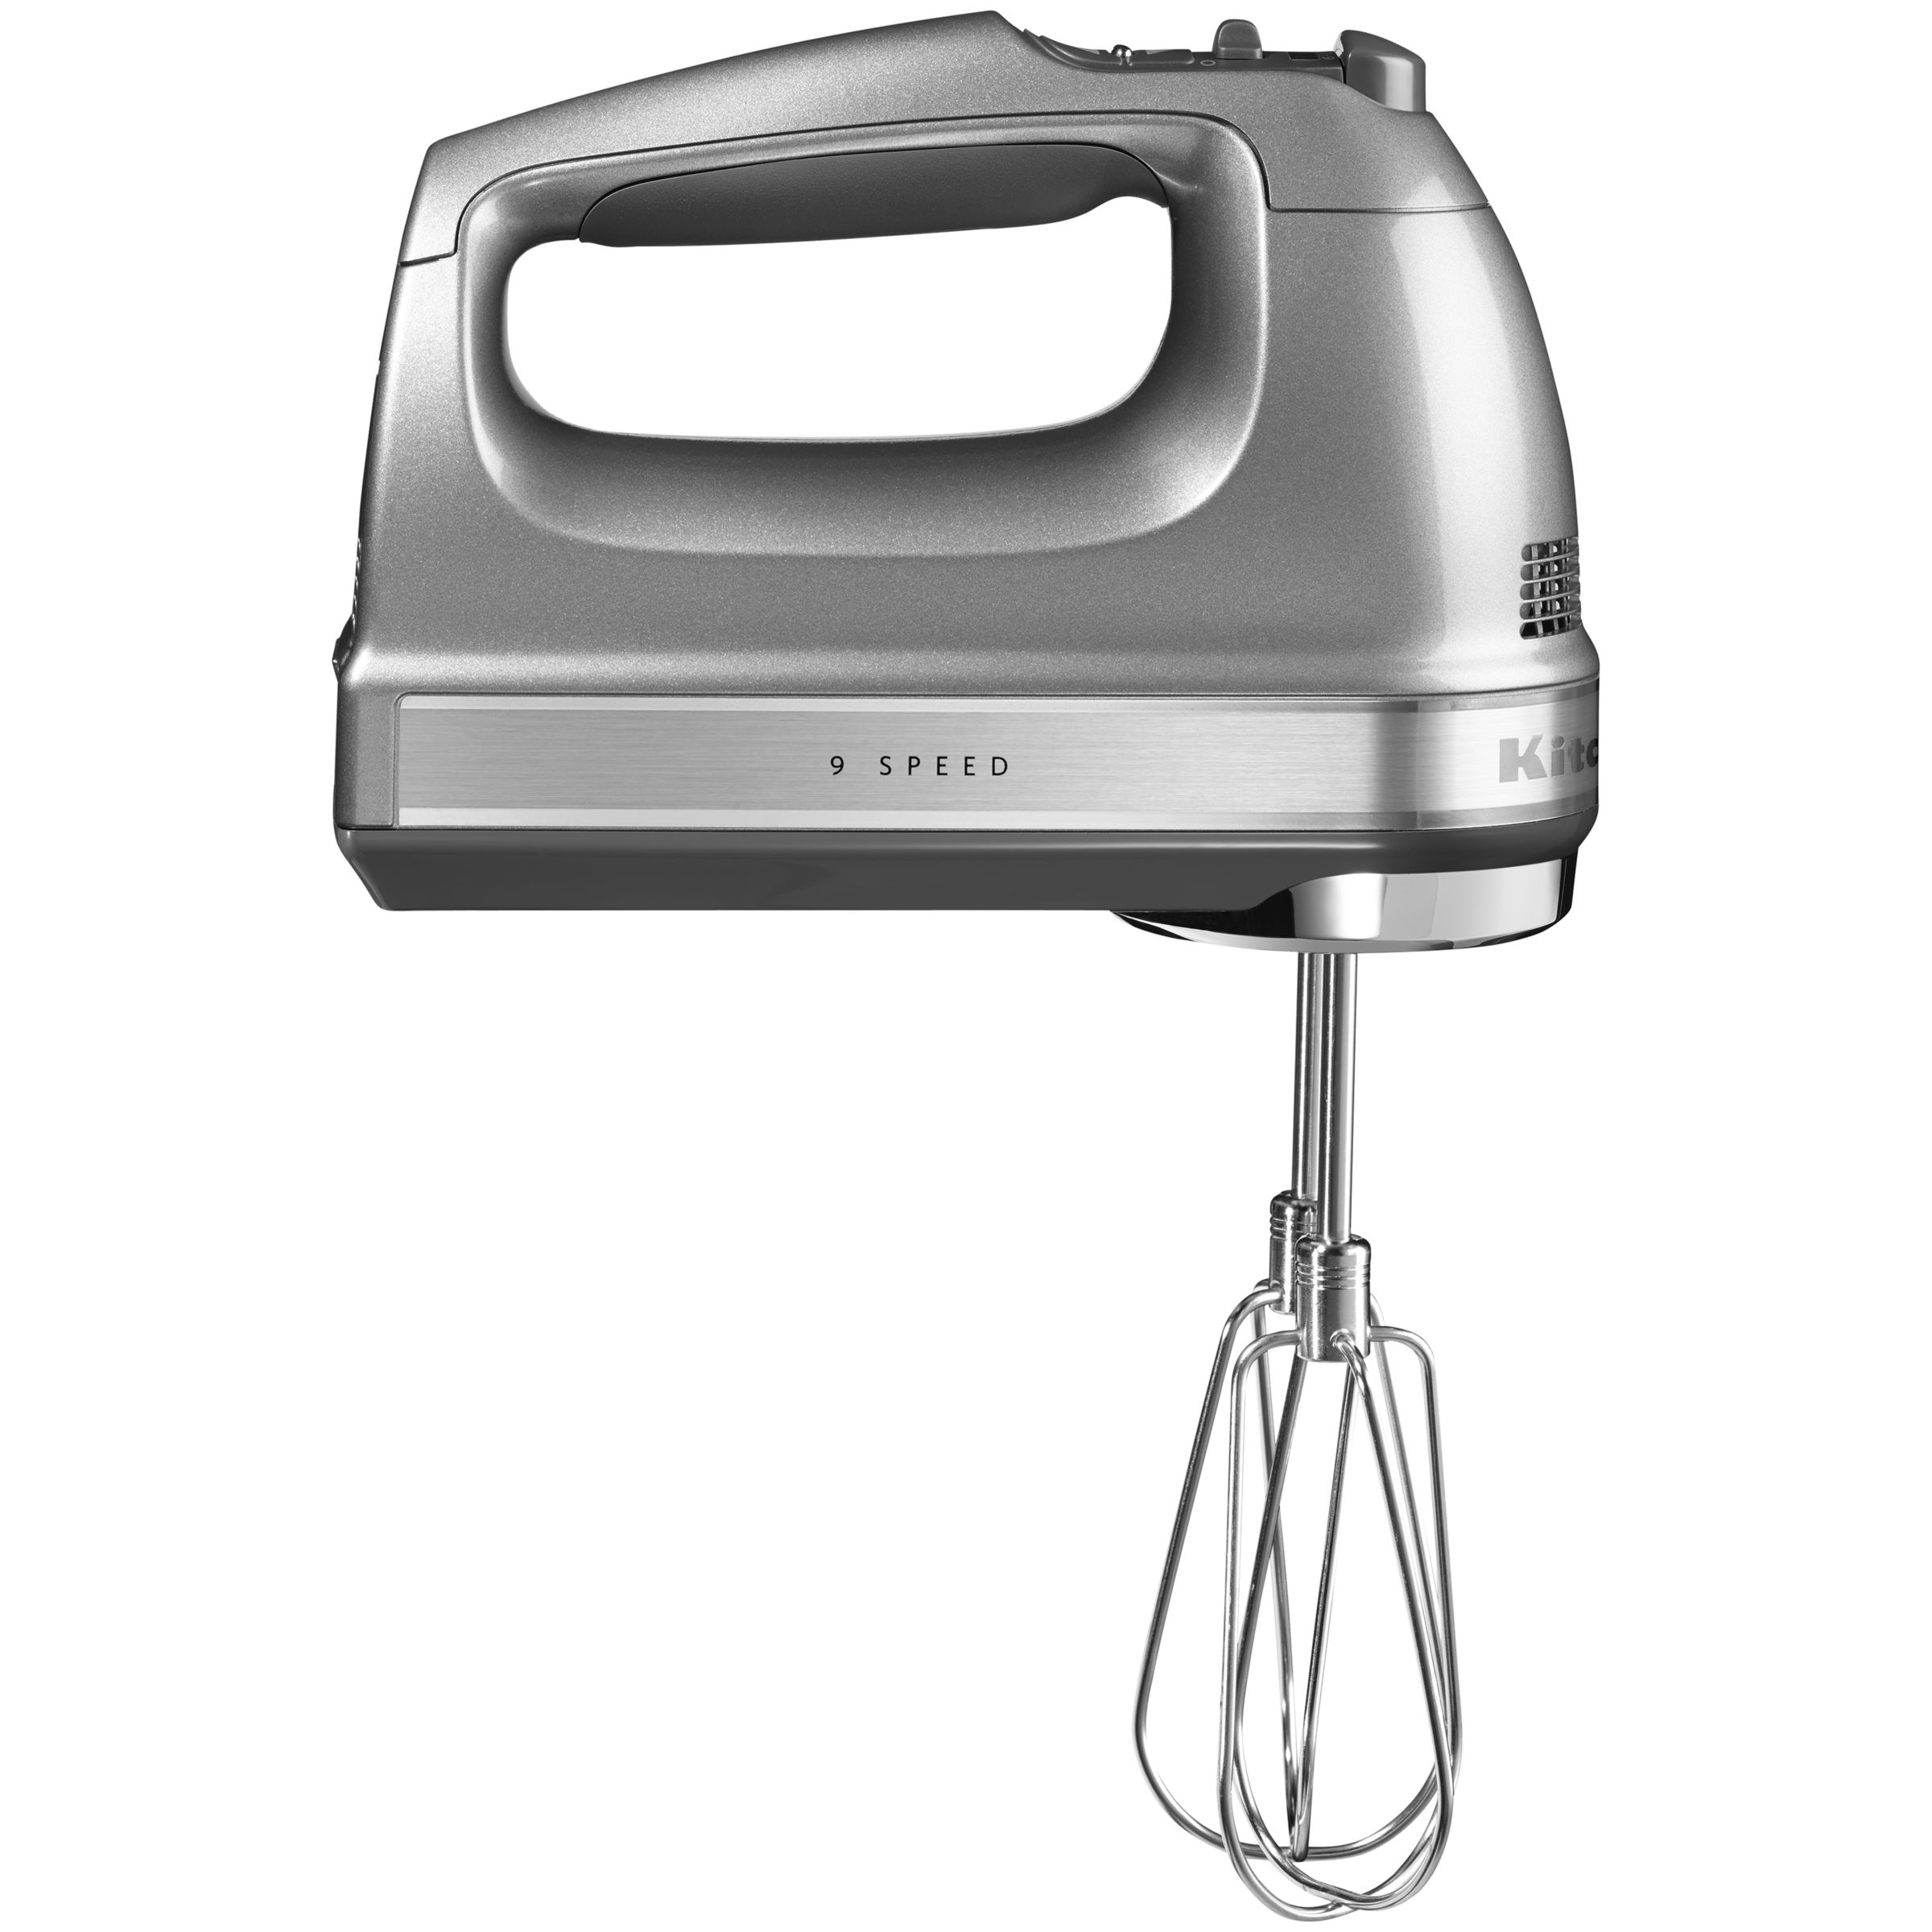 where can i buy a hand mixer